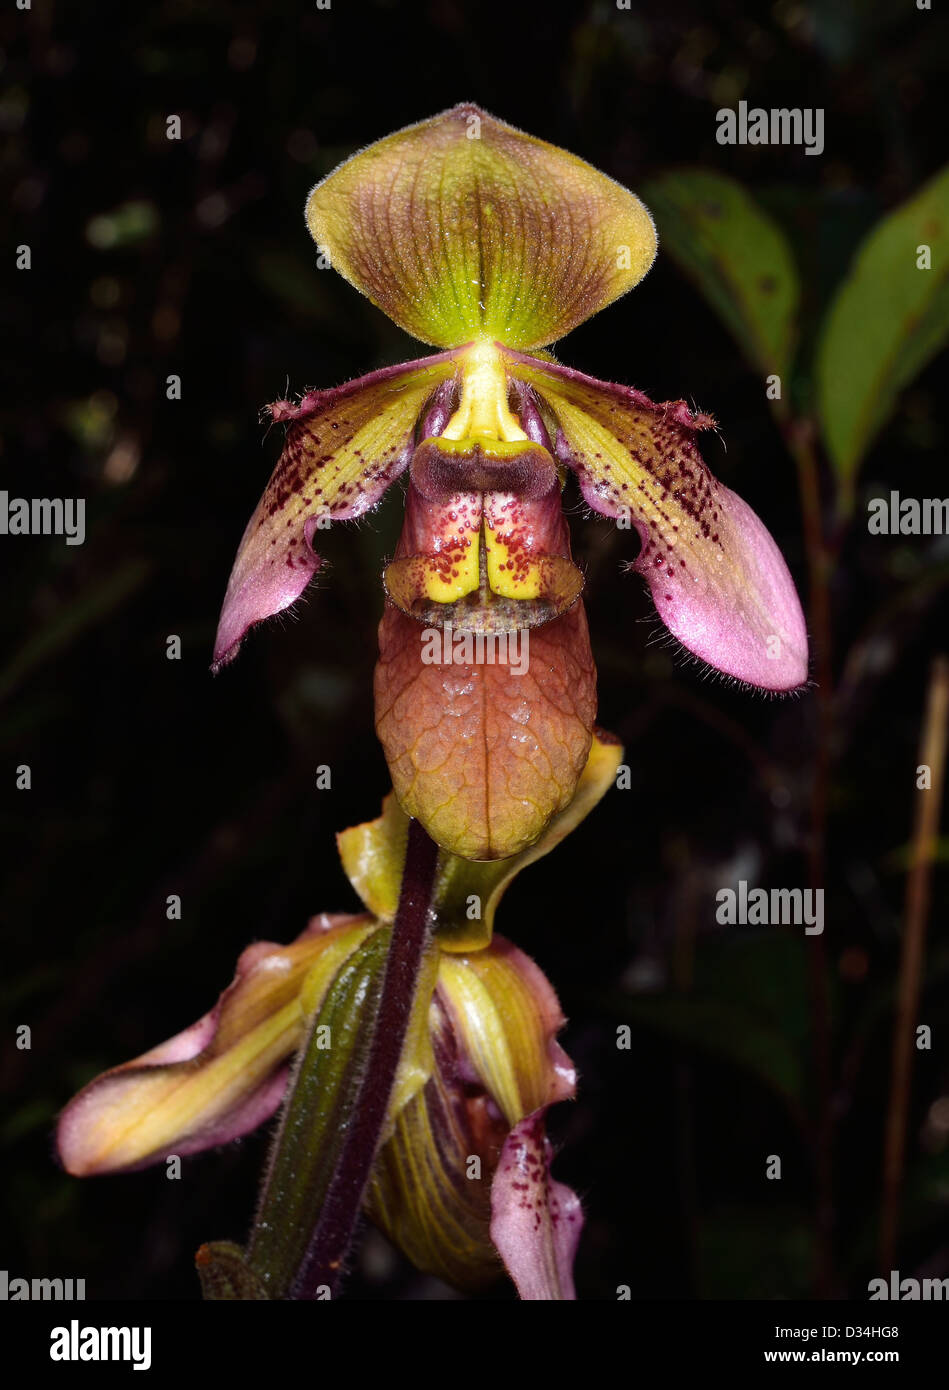 A Lady's Slipper orchid flower in wild. Kinabalu National Park, Sabah, Borneo, Malaysia. Stock Photo